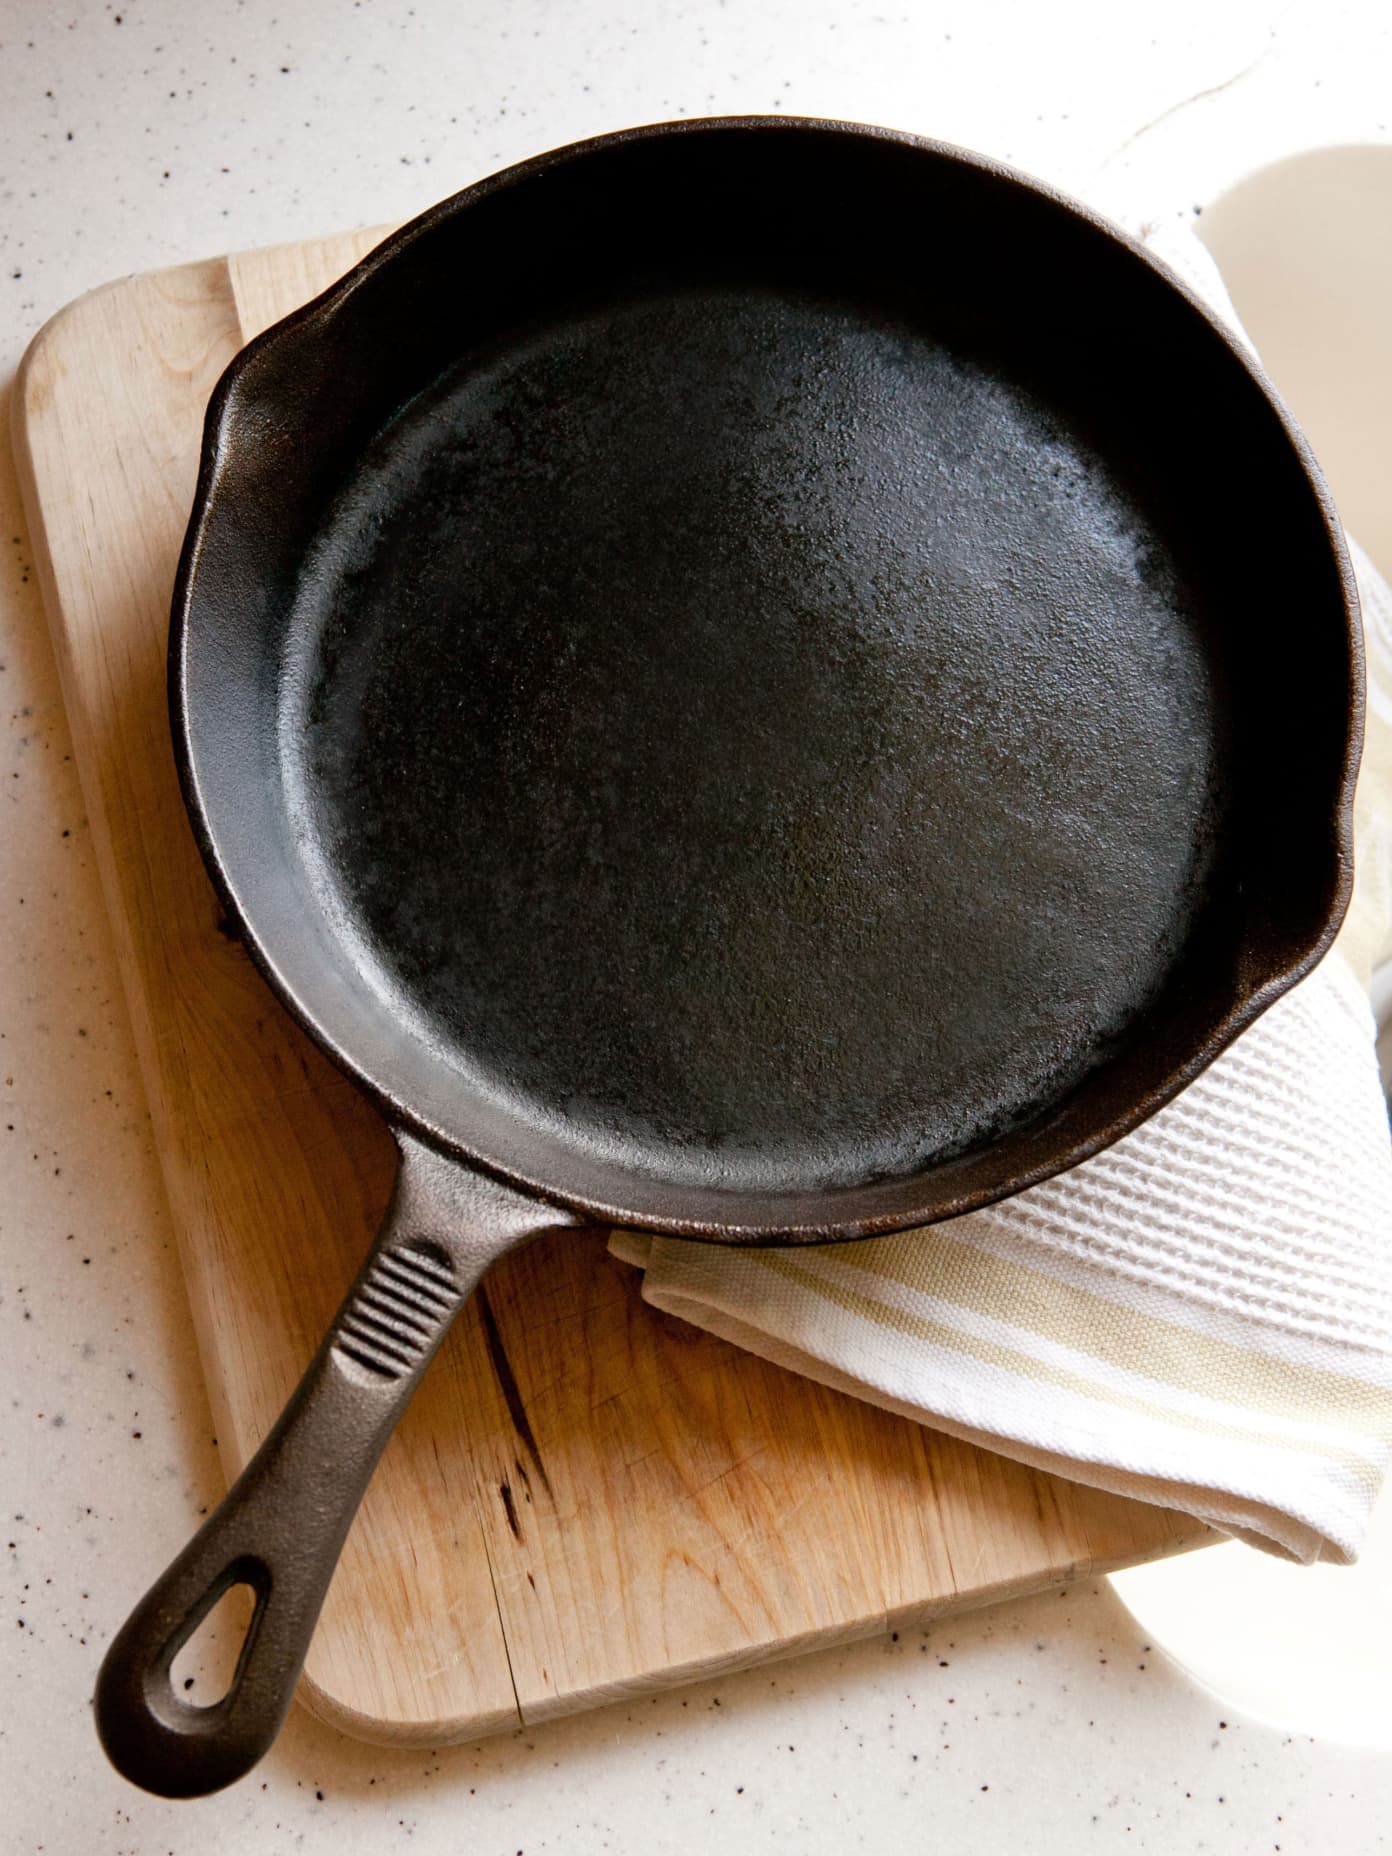 How to Remove Rust From Cast Iron